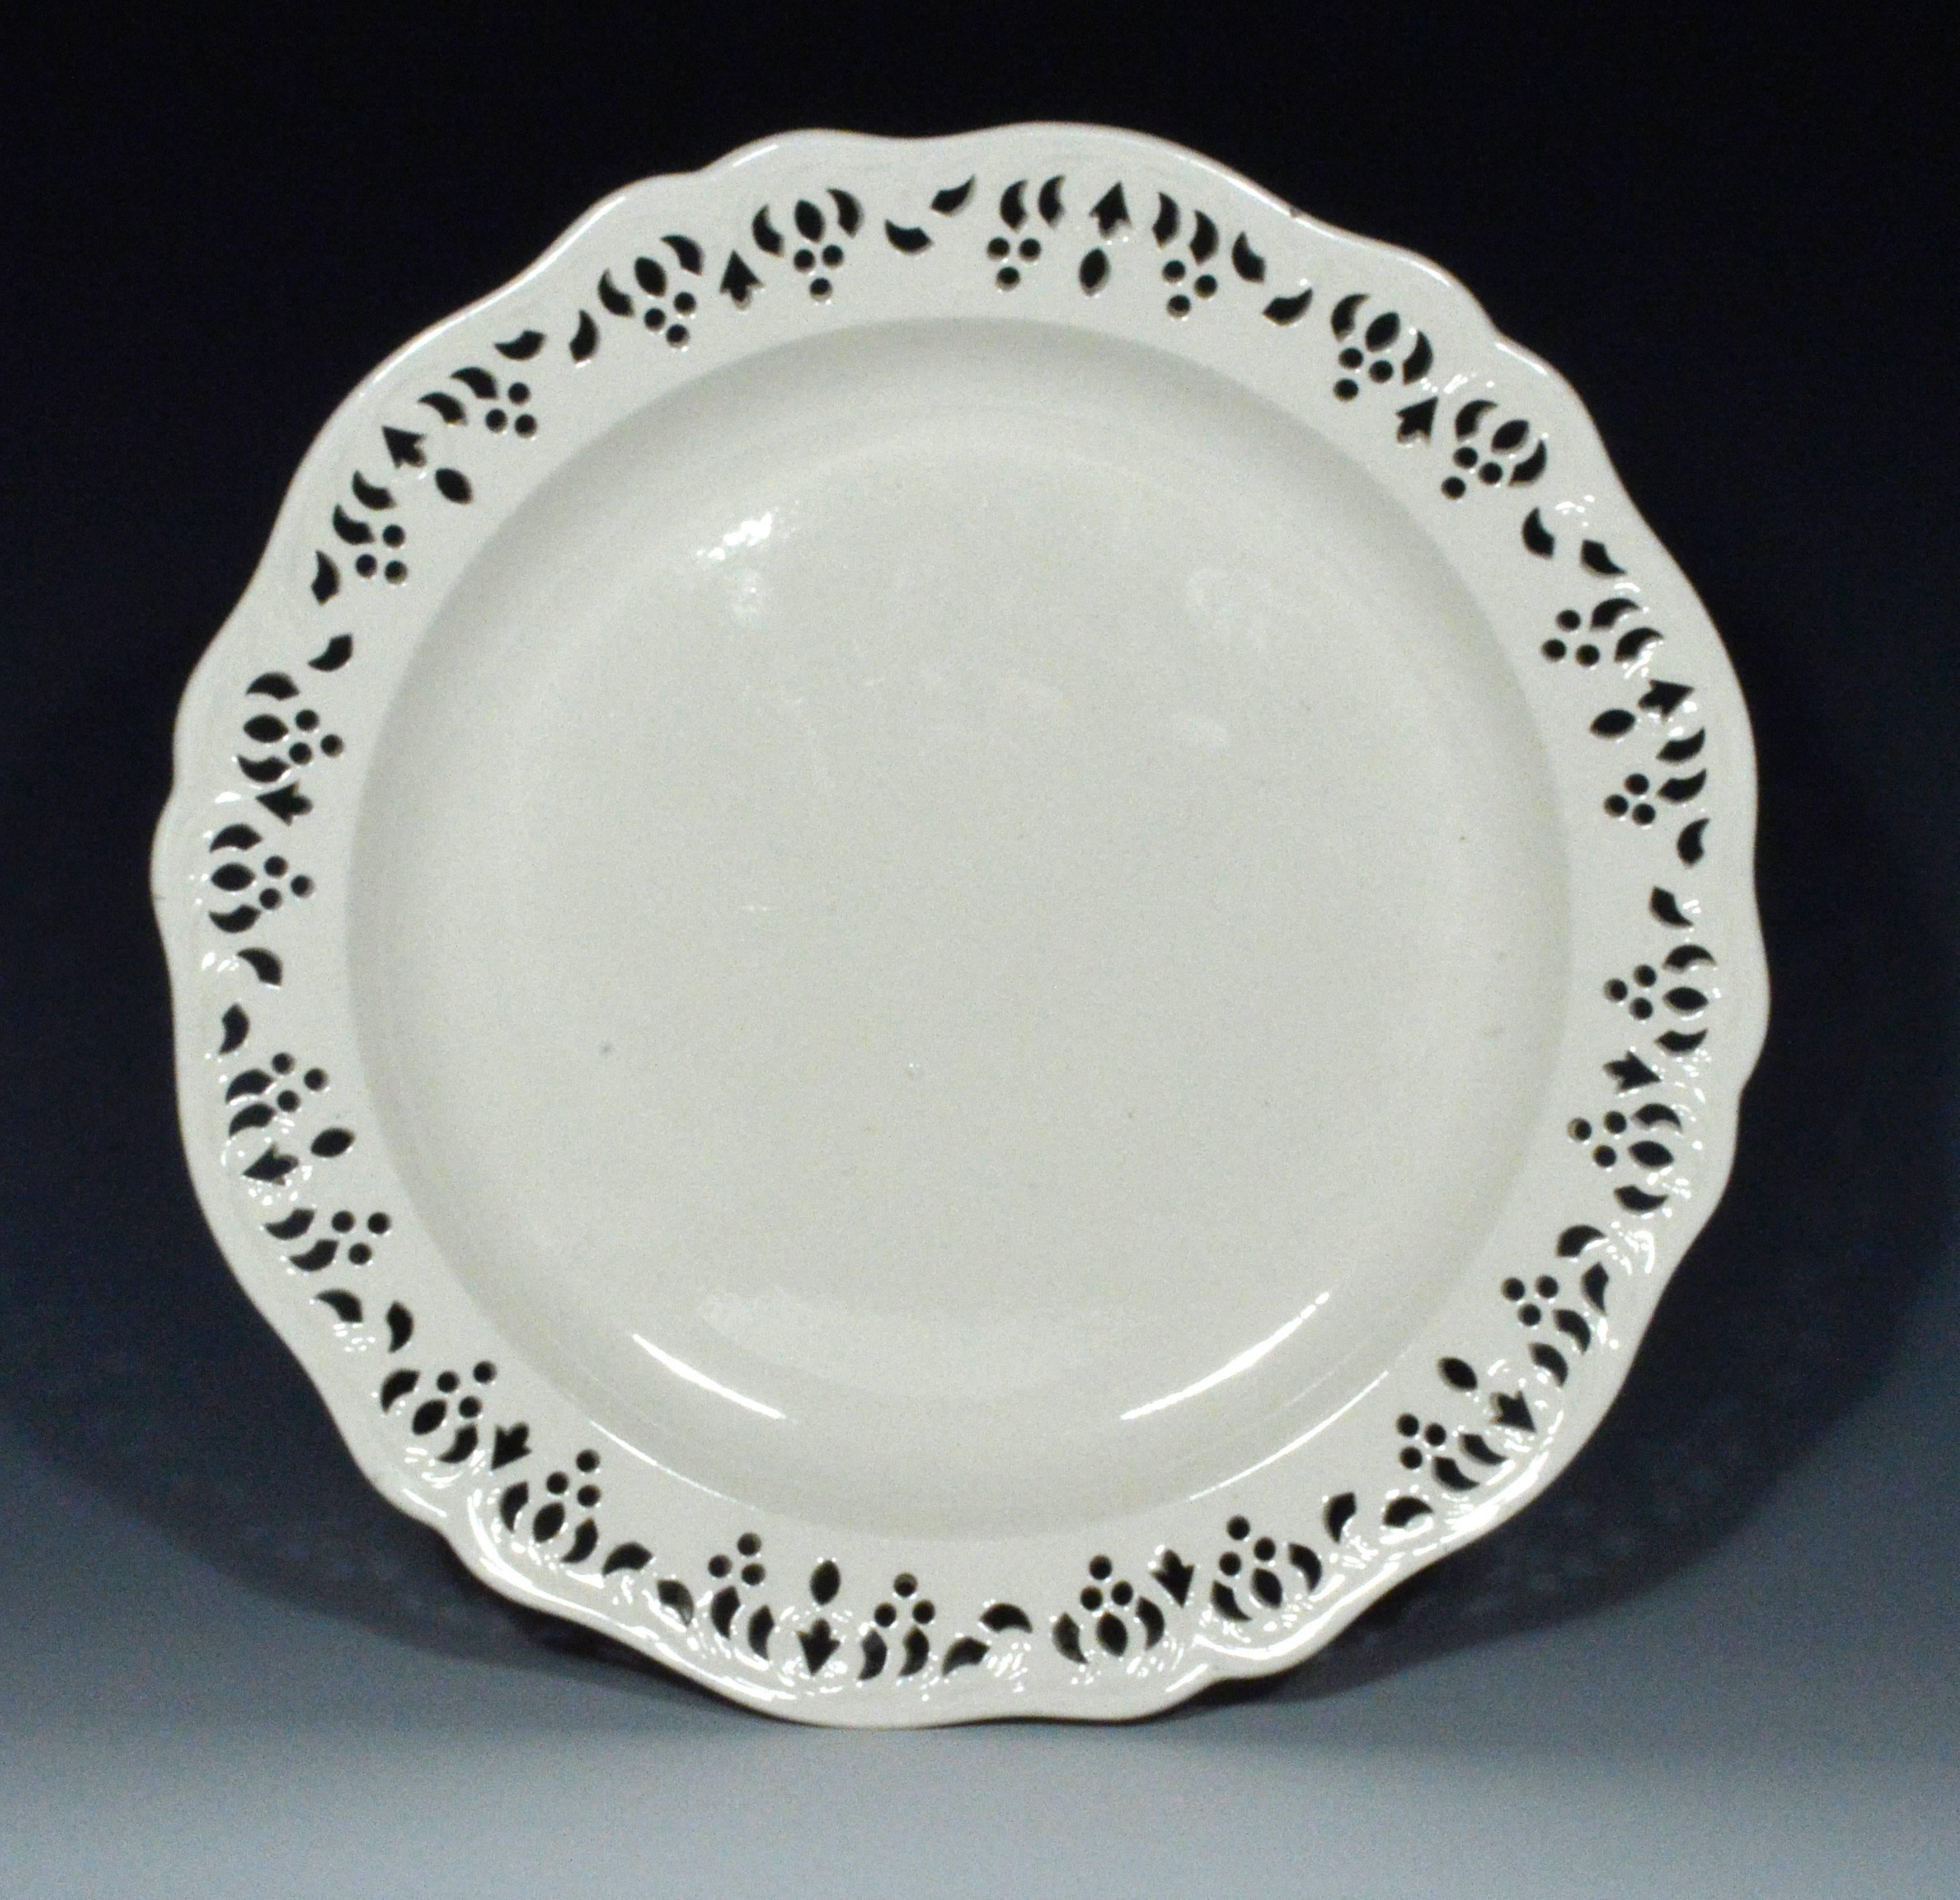 The Wedgwood plain-undecorated plates are of circular form with openwork shaped rims.

Impressed: Wedgewood.